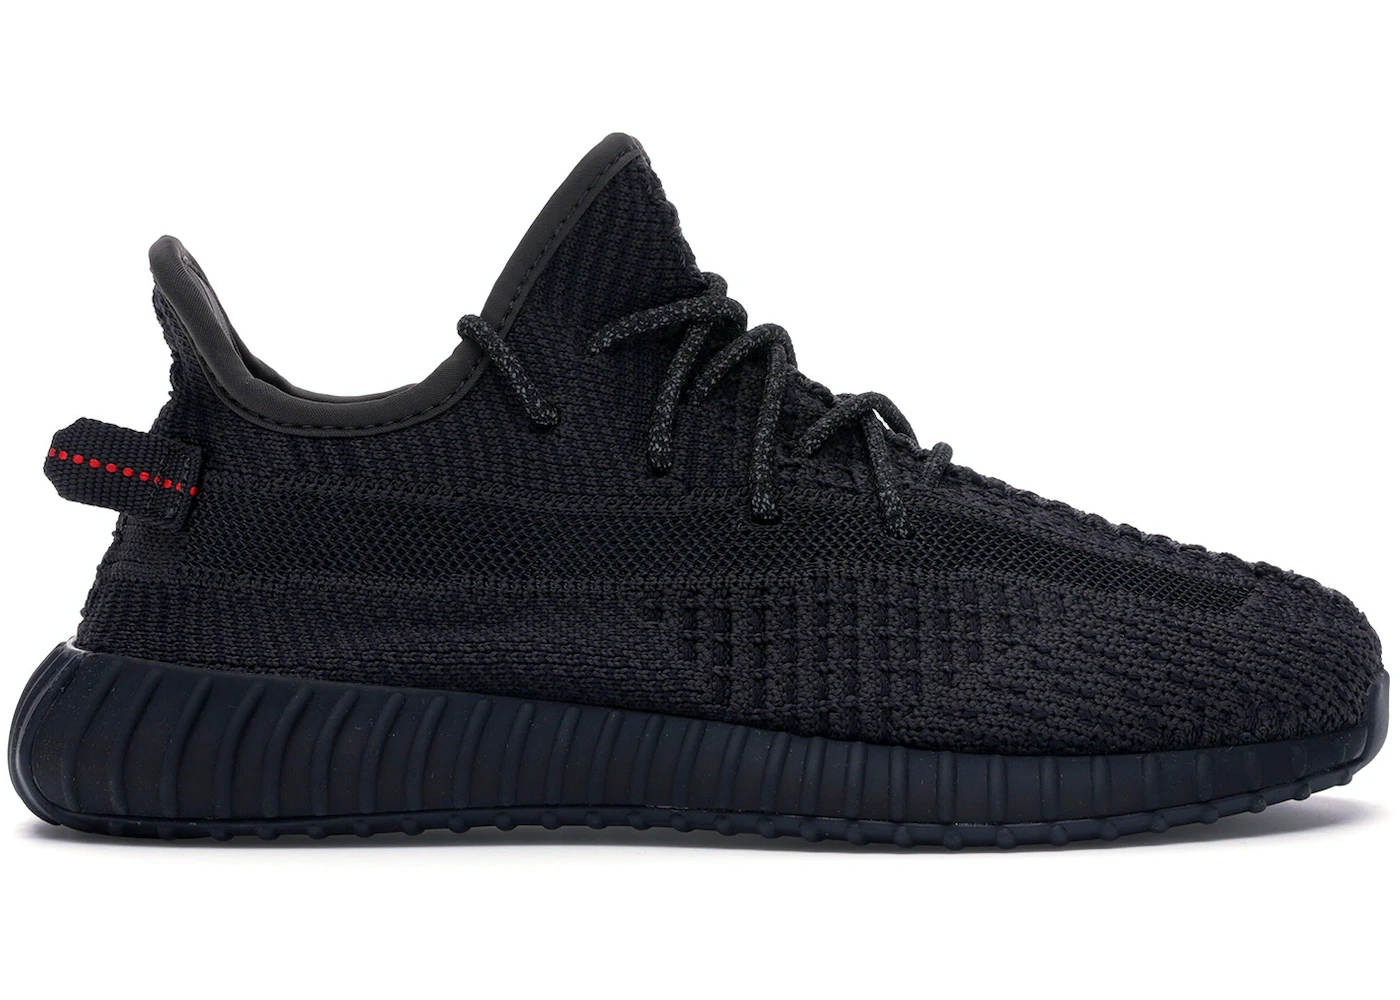 somewhat Easy experimental adidas Yeezy Boost 350 V2 Black (Kids) (Non-Reflective) - FU9013 - US